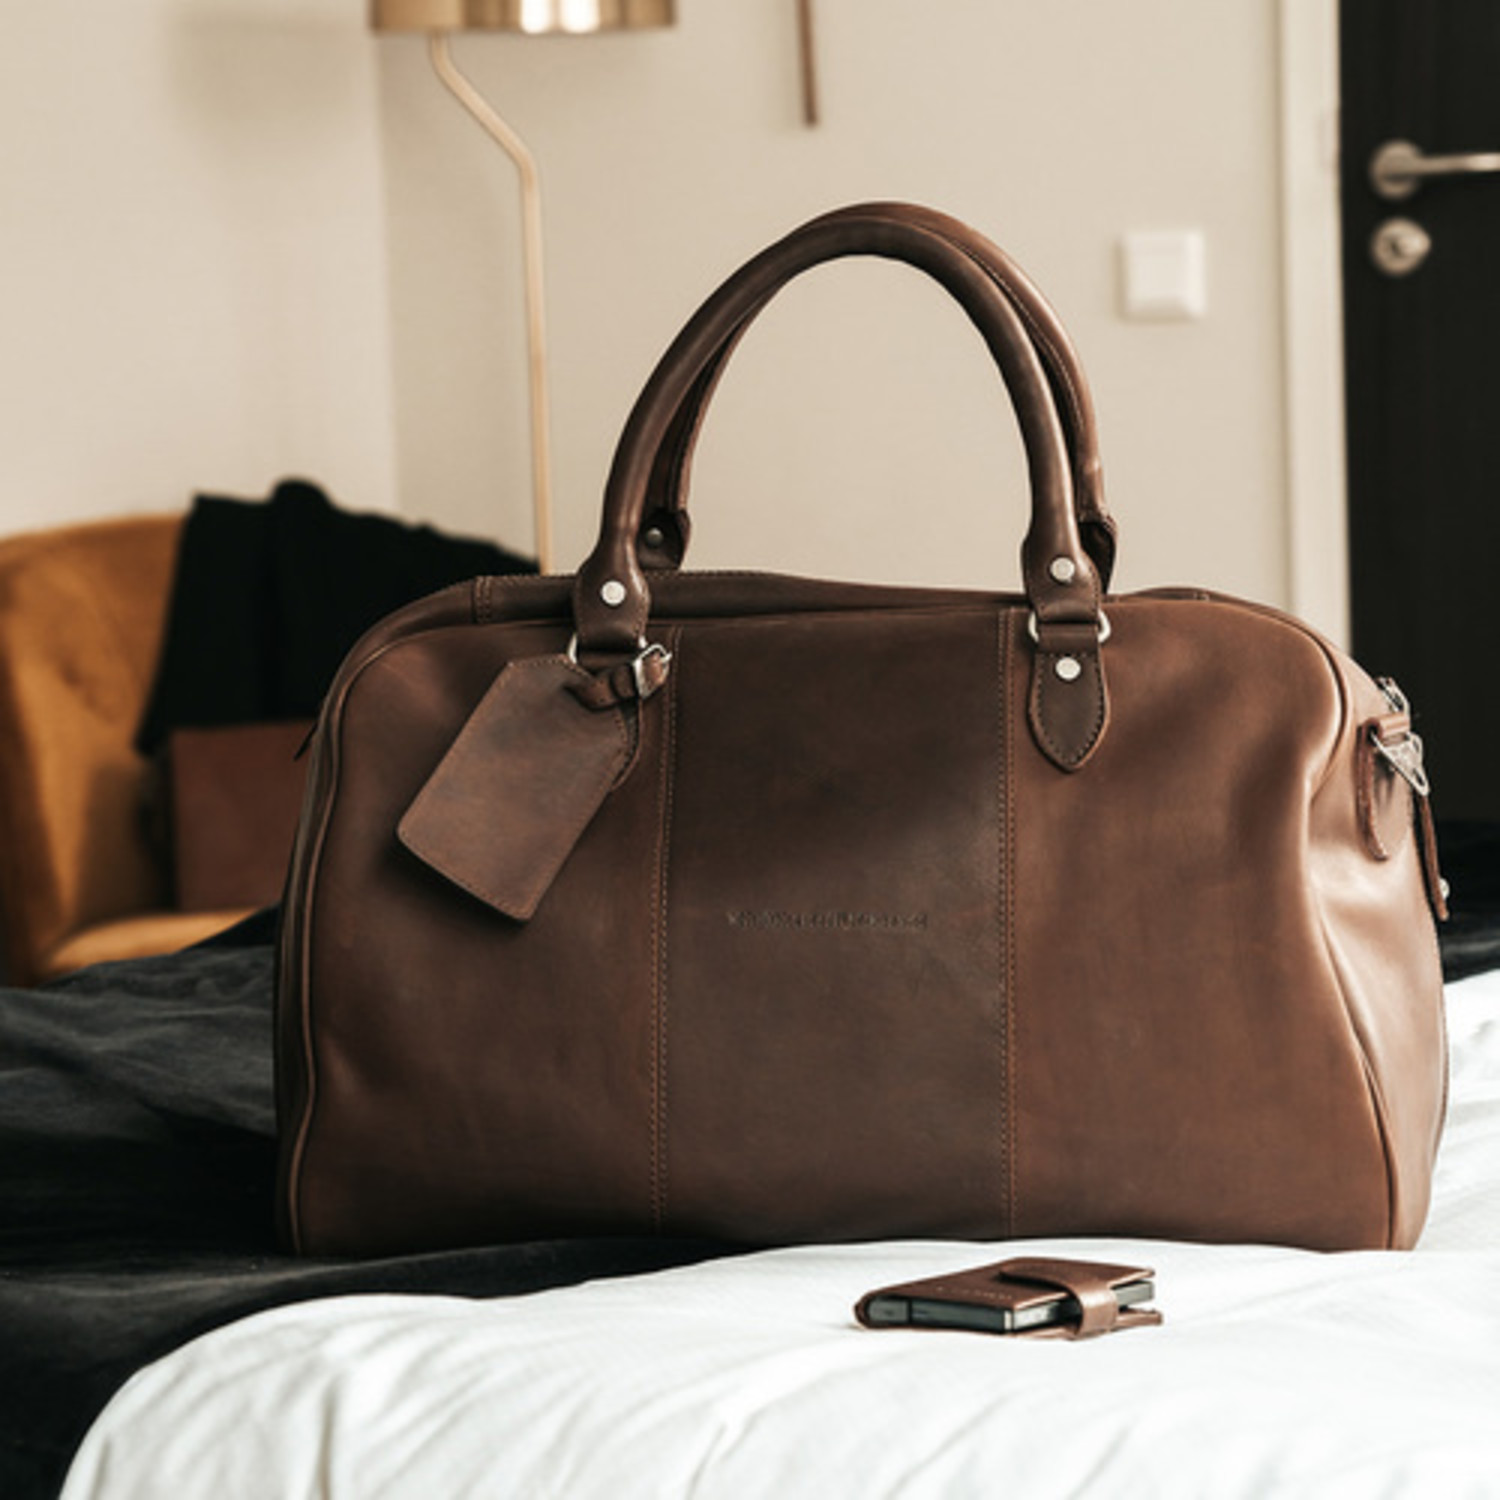 Leather Travel Bag  Shop The Chesterfield Brand for leather